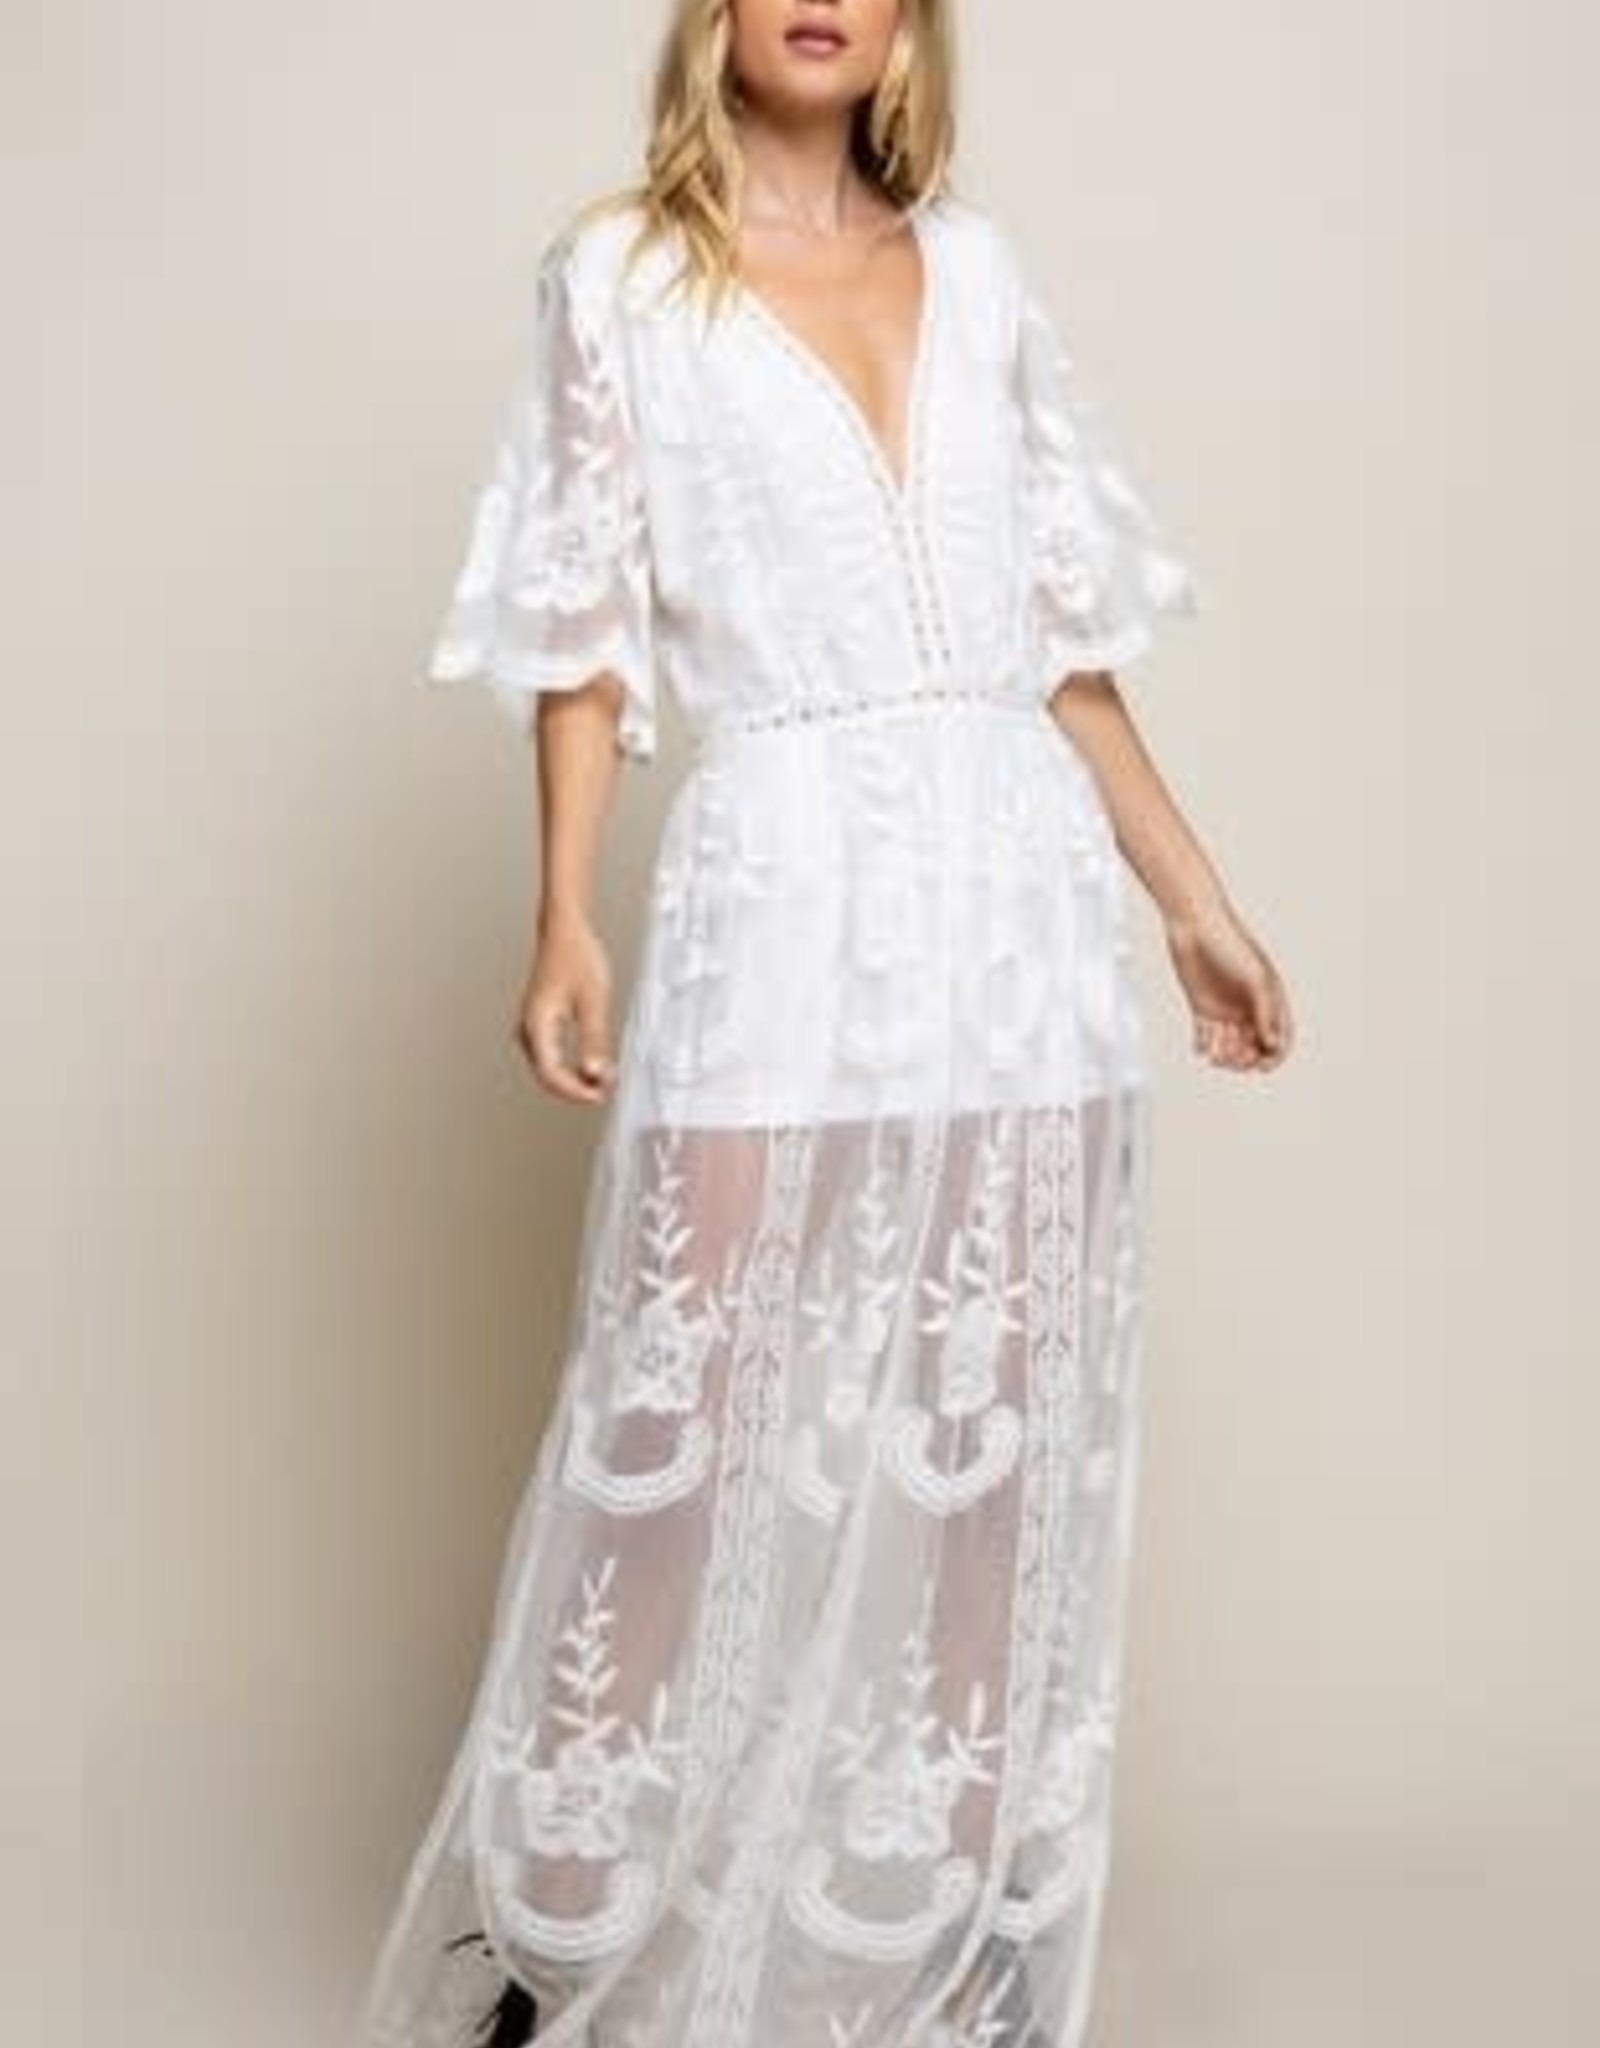 HOTOVELI Embroidered Lace Romper Dress